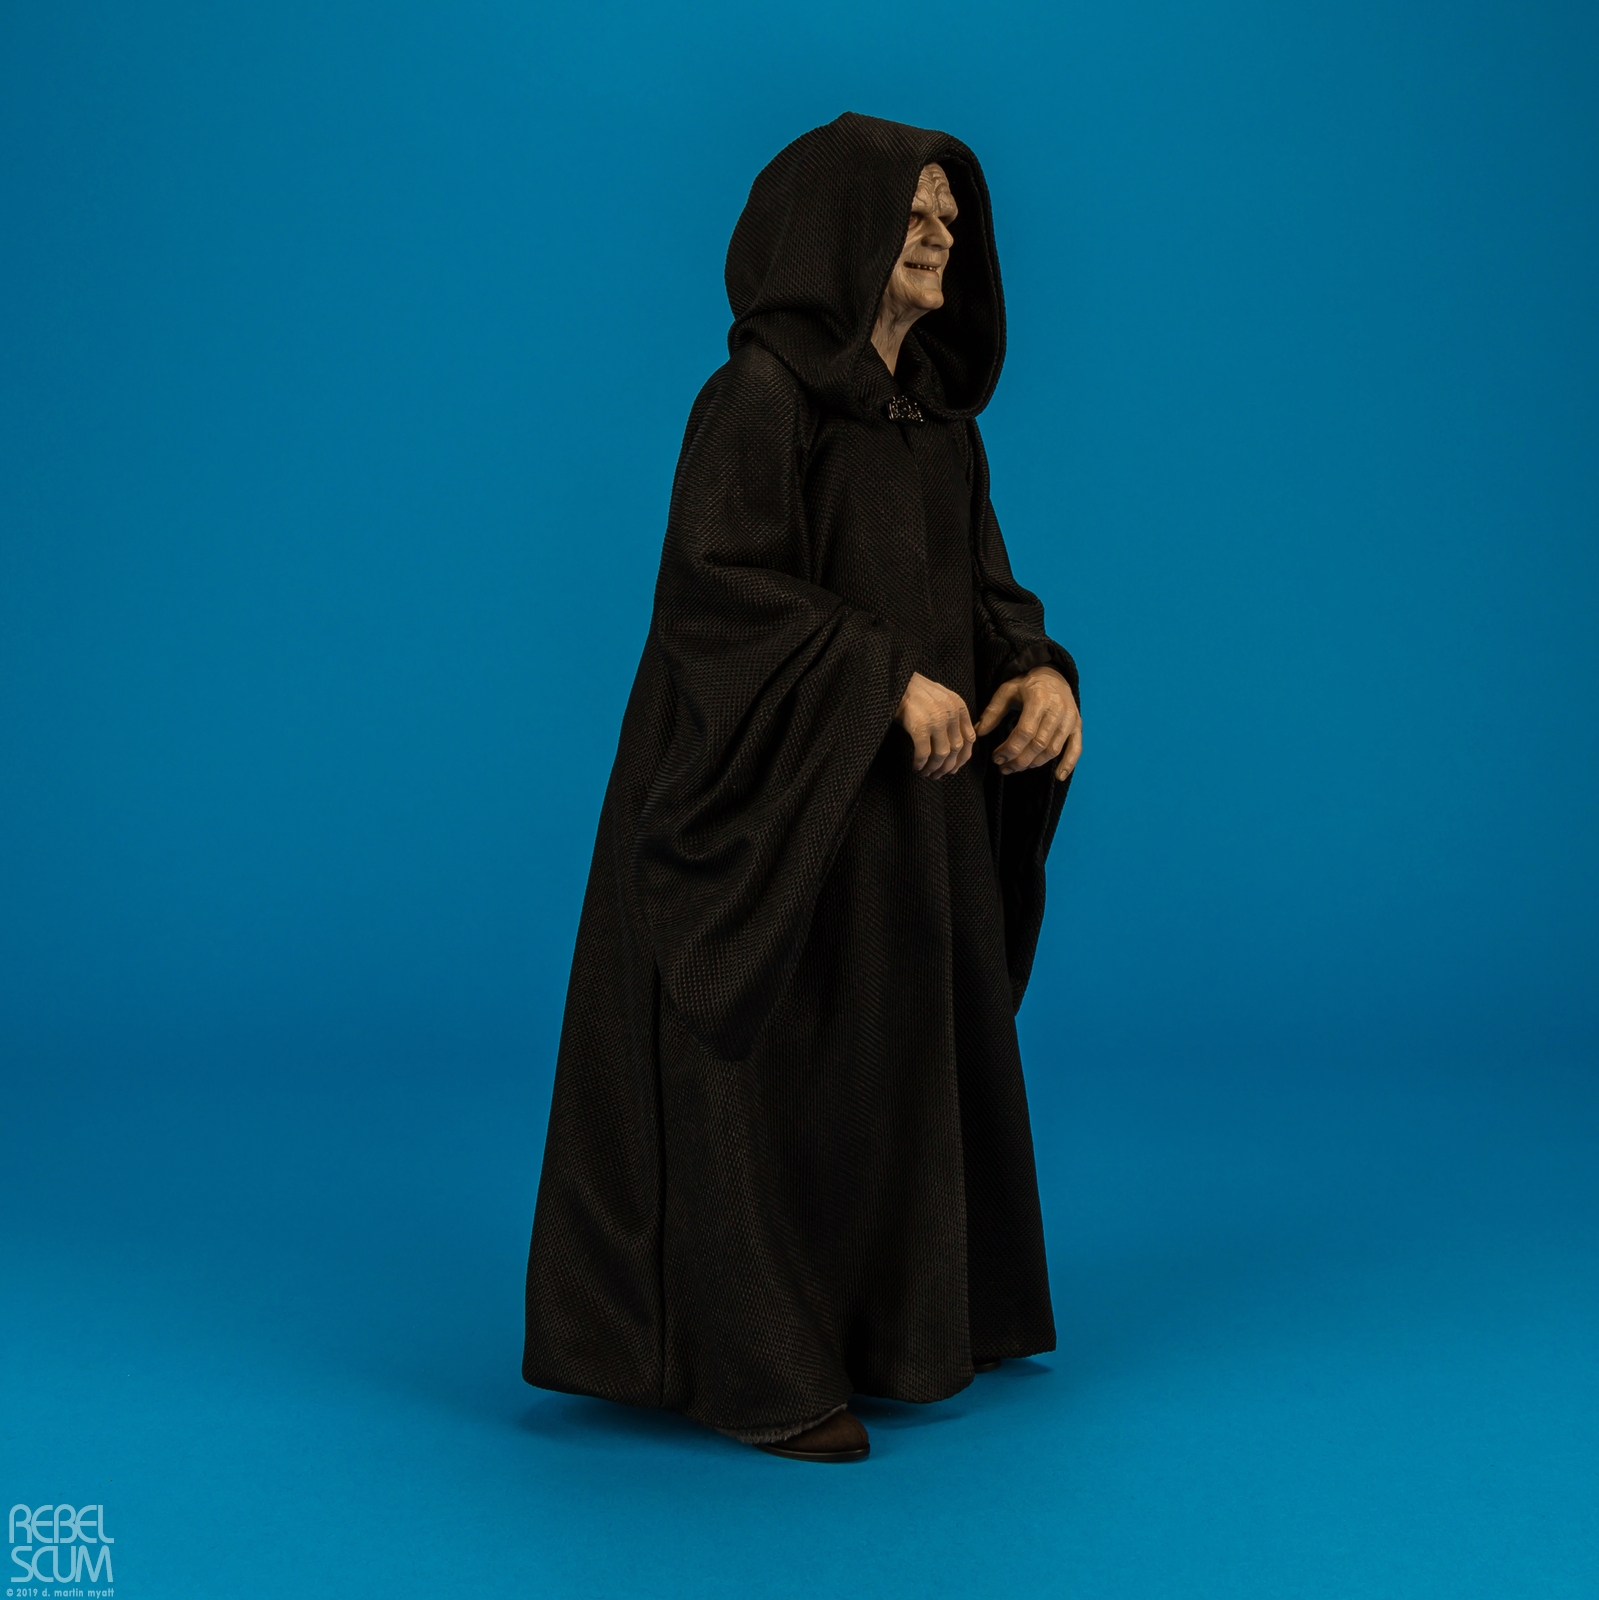 Emperor-Palpatine-Deluxe-Version-MMS468-Hot-Toys-010.jpg